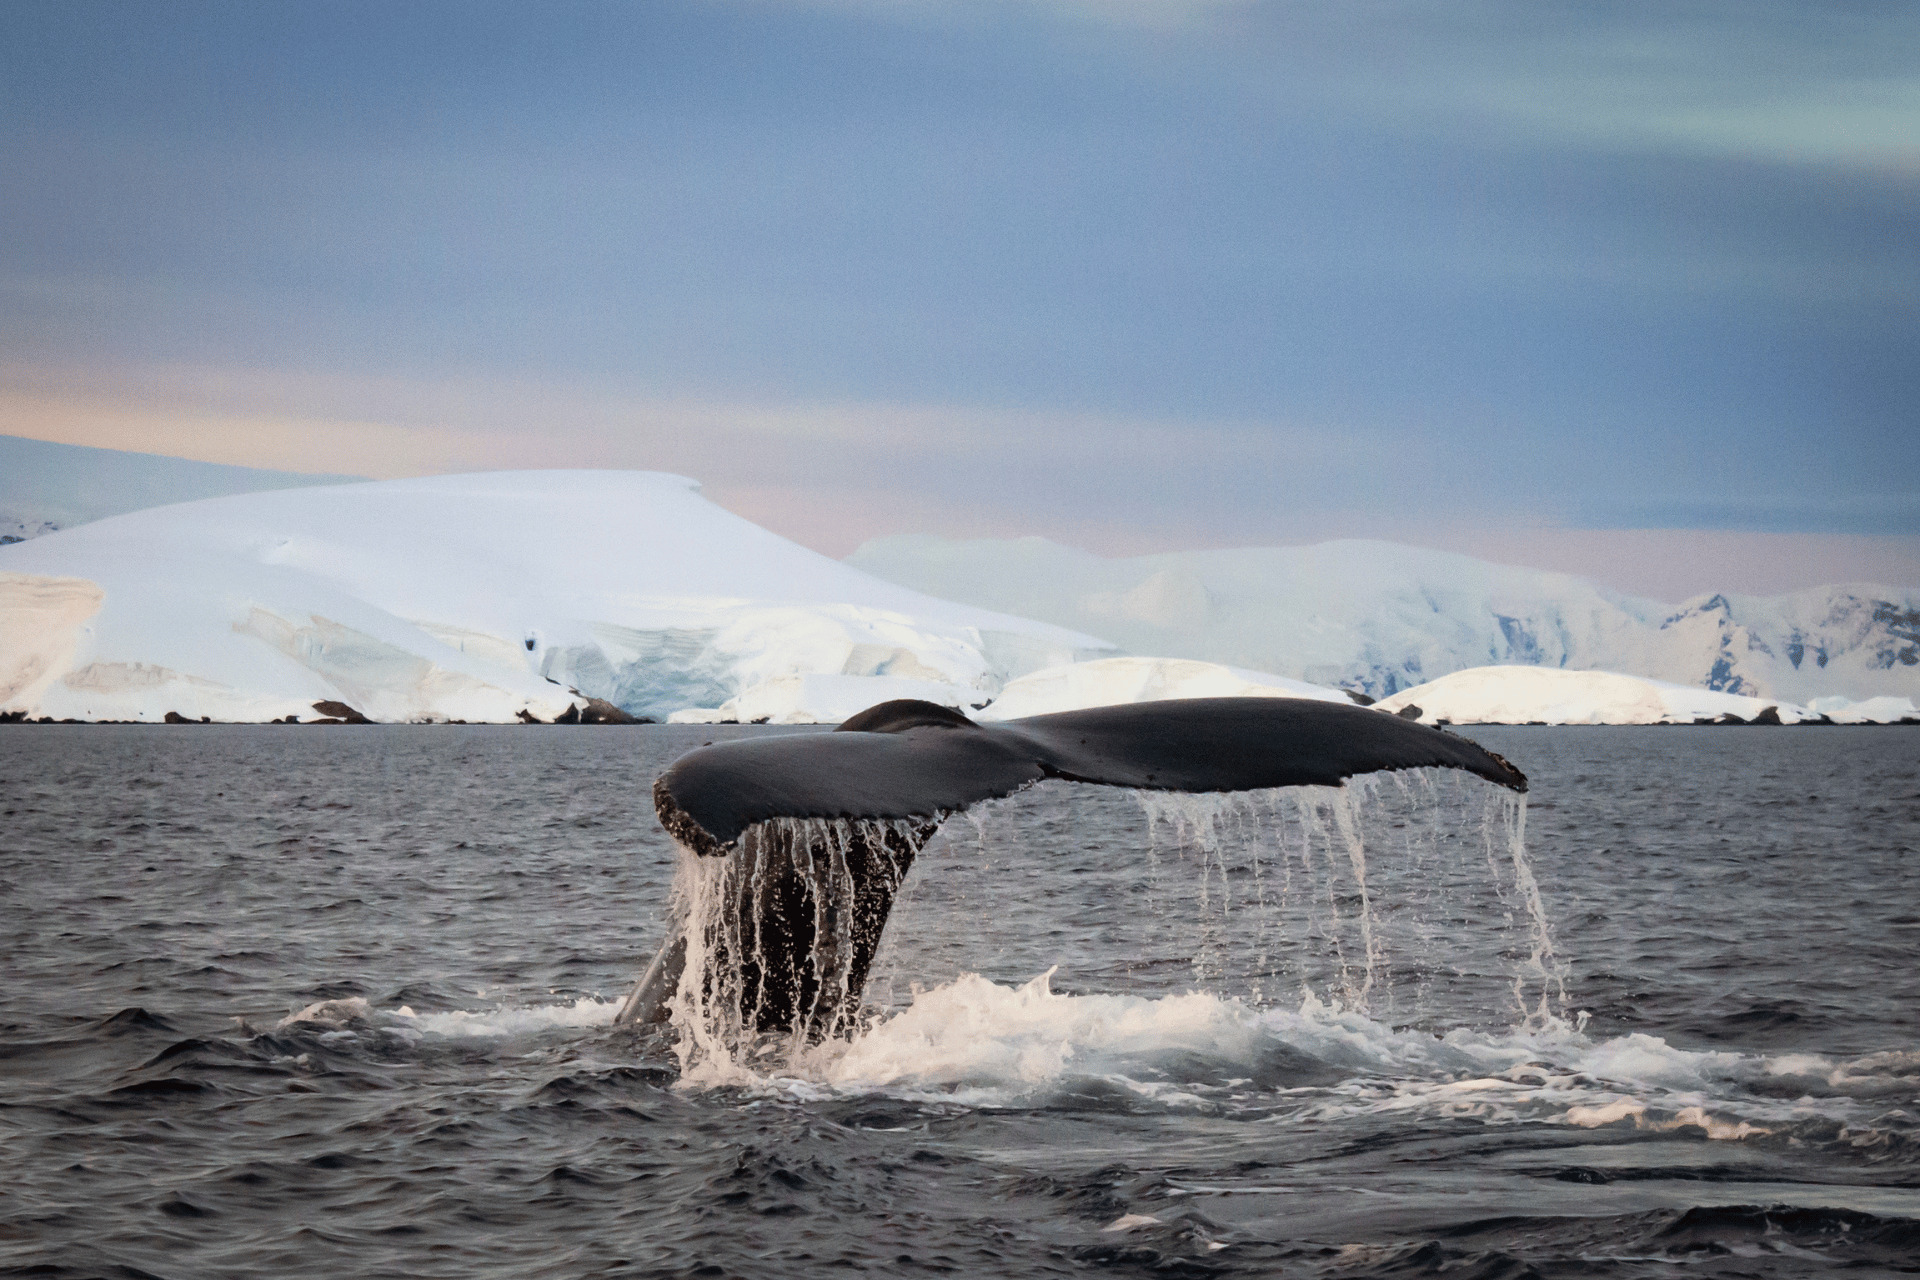 The tail of a humpback whale in Antarctica